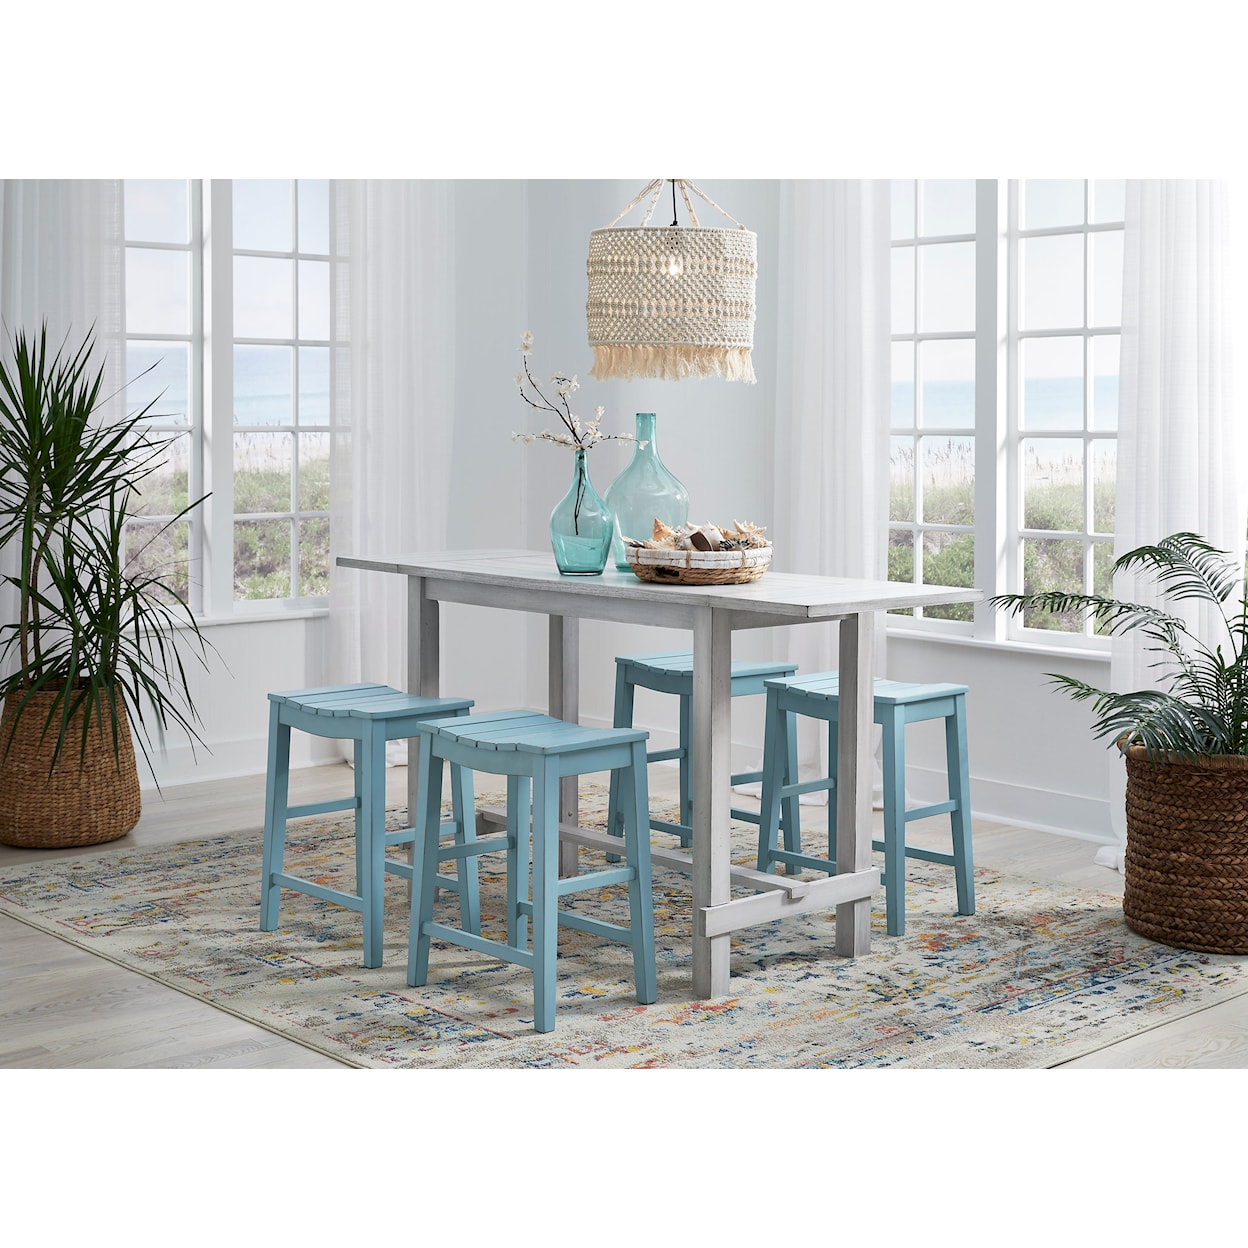 Progressive Furniture Holiday Counter-Height Dining Stools